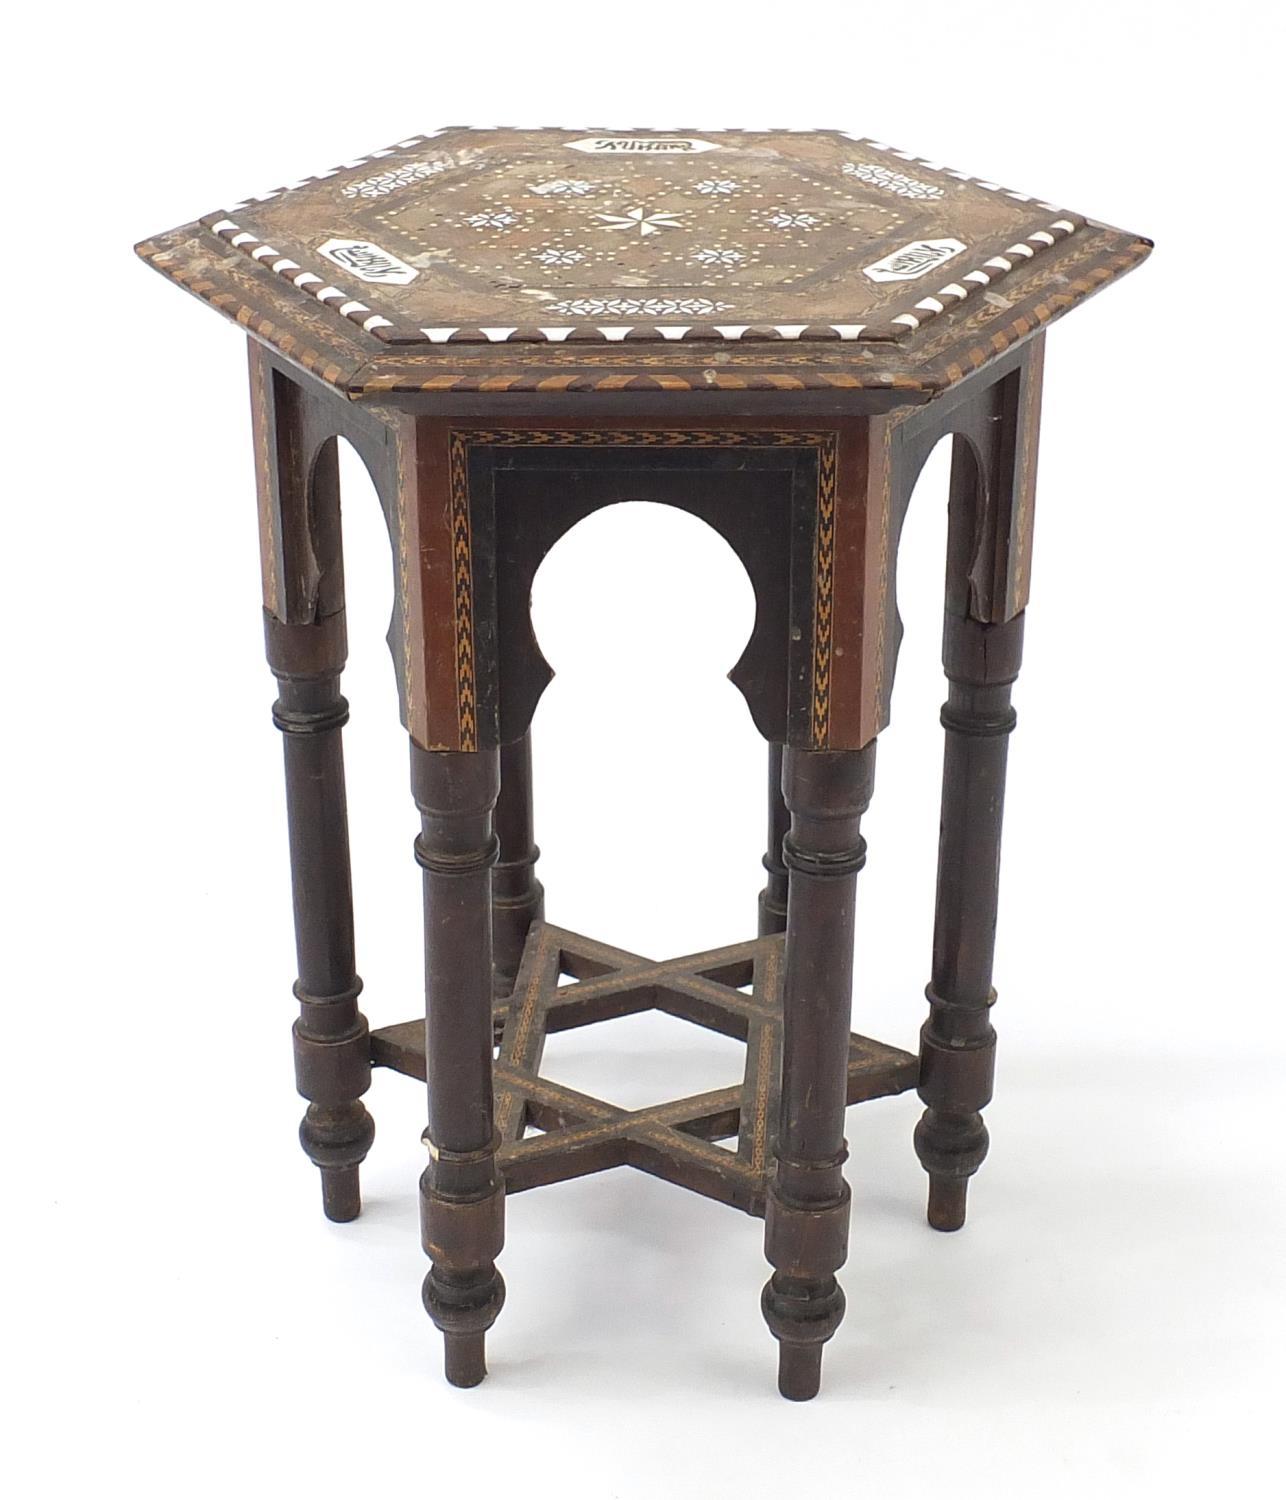 Islamic inlaid hexagonal table decorated with script, 49cm high : For further condition reports